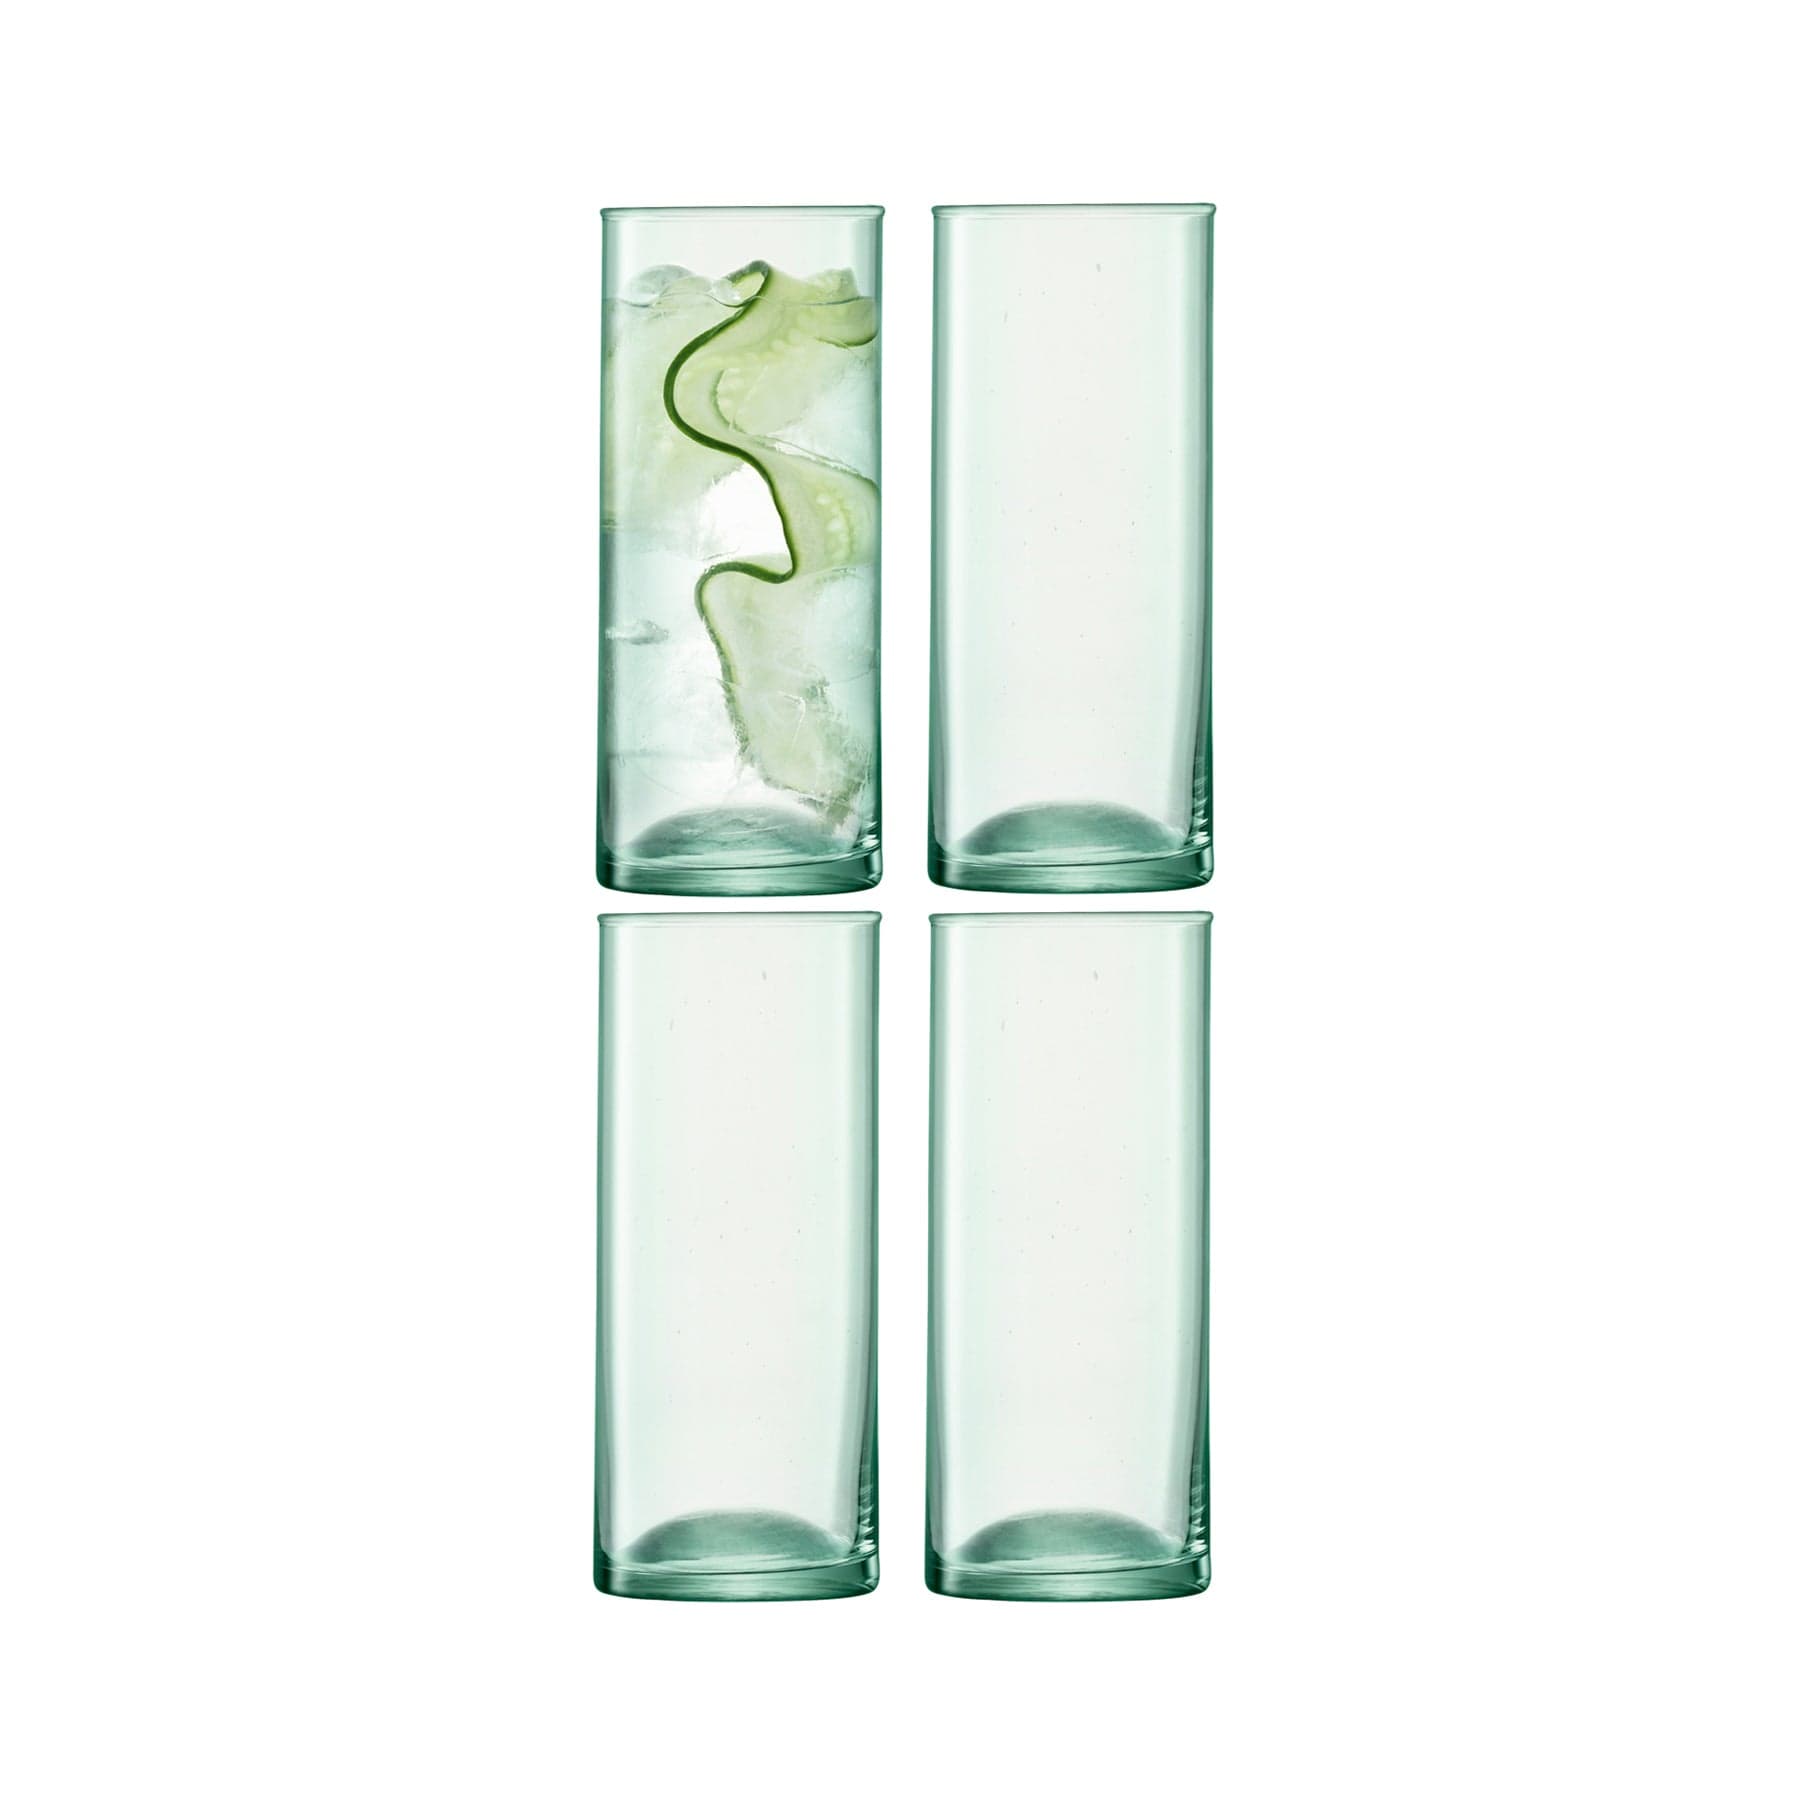 Canopy beer glass 520ml x 4